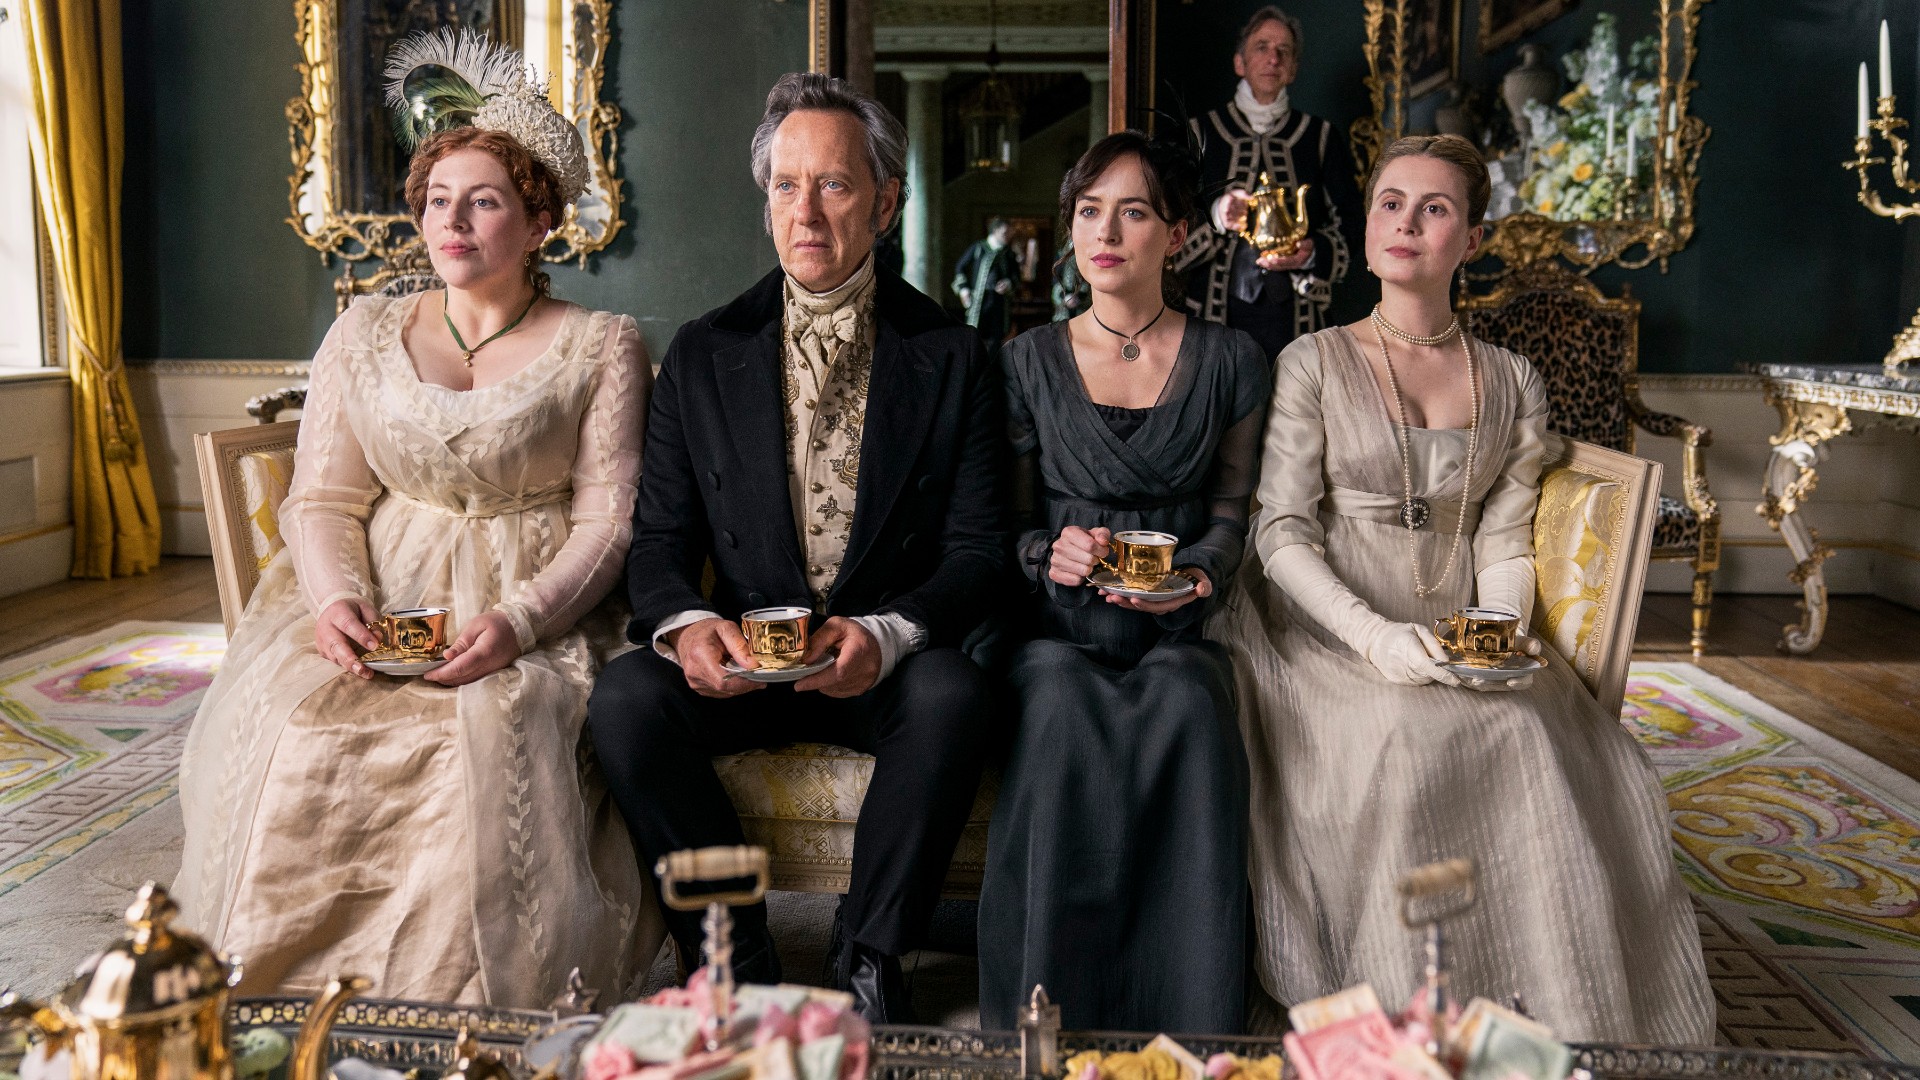 Persuasion book adaptations to watch as Netflix's Persuasion movie is slated | Woman & Home |